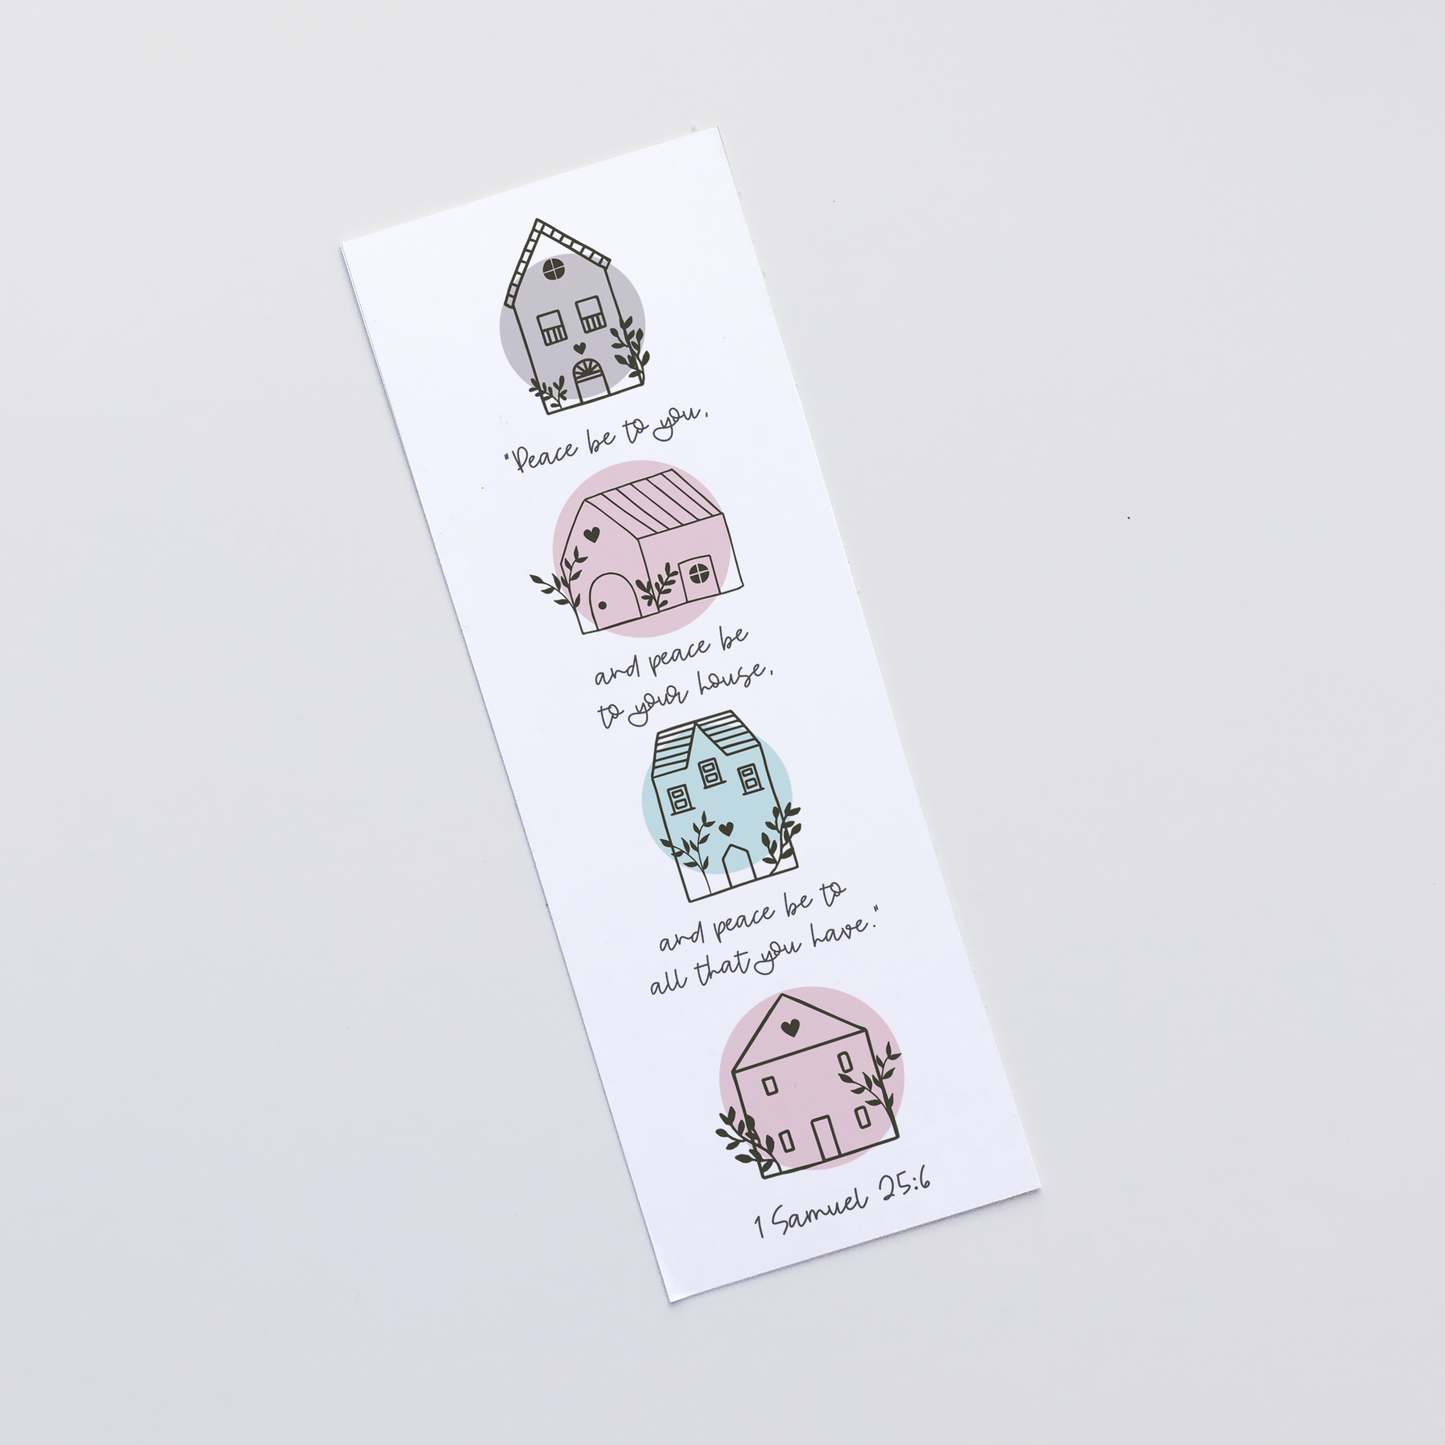 Christian Bookmark Gift - Peace be to your house 1 Samuel 25:6 - The Wee Sparrow